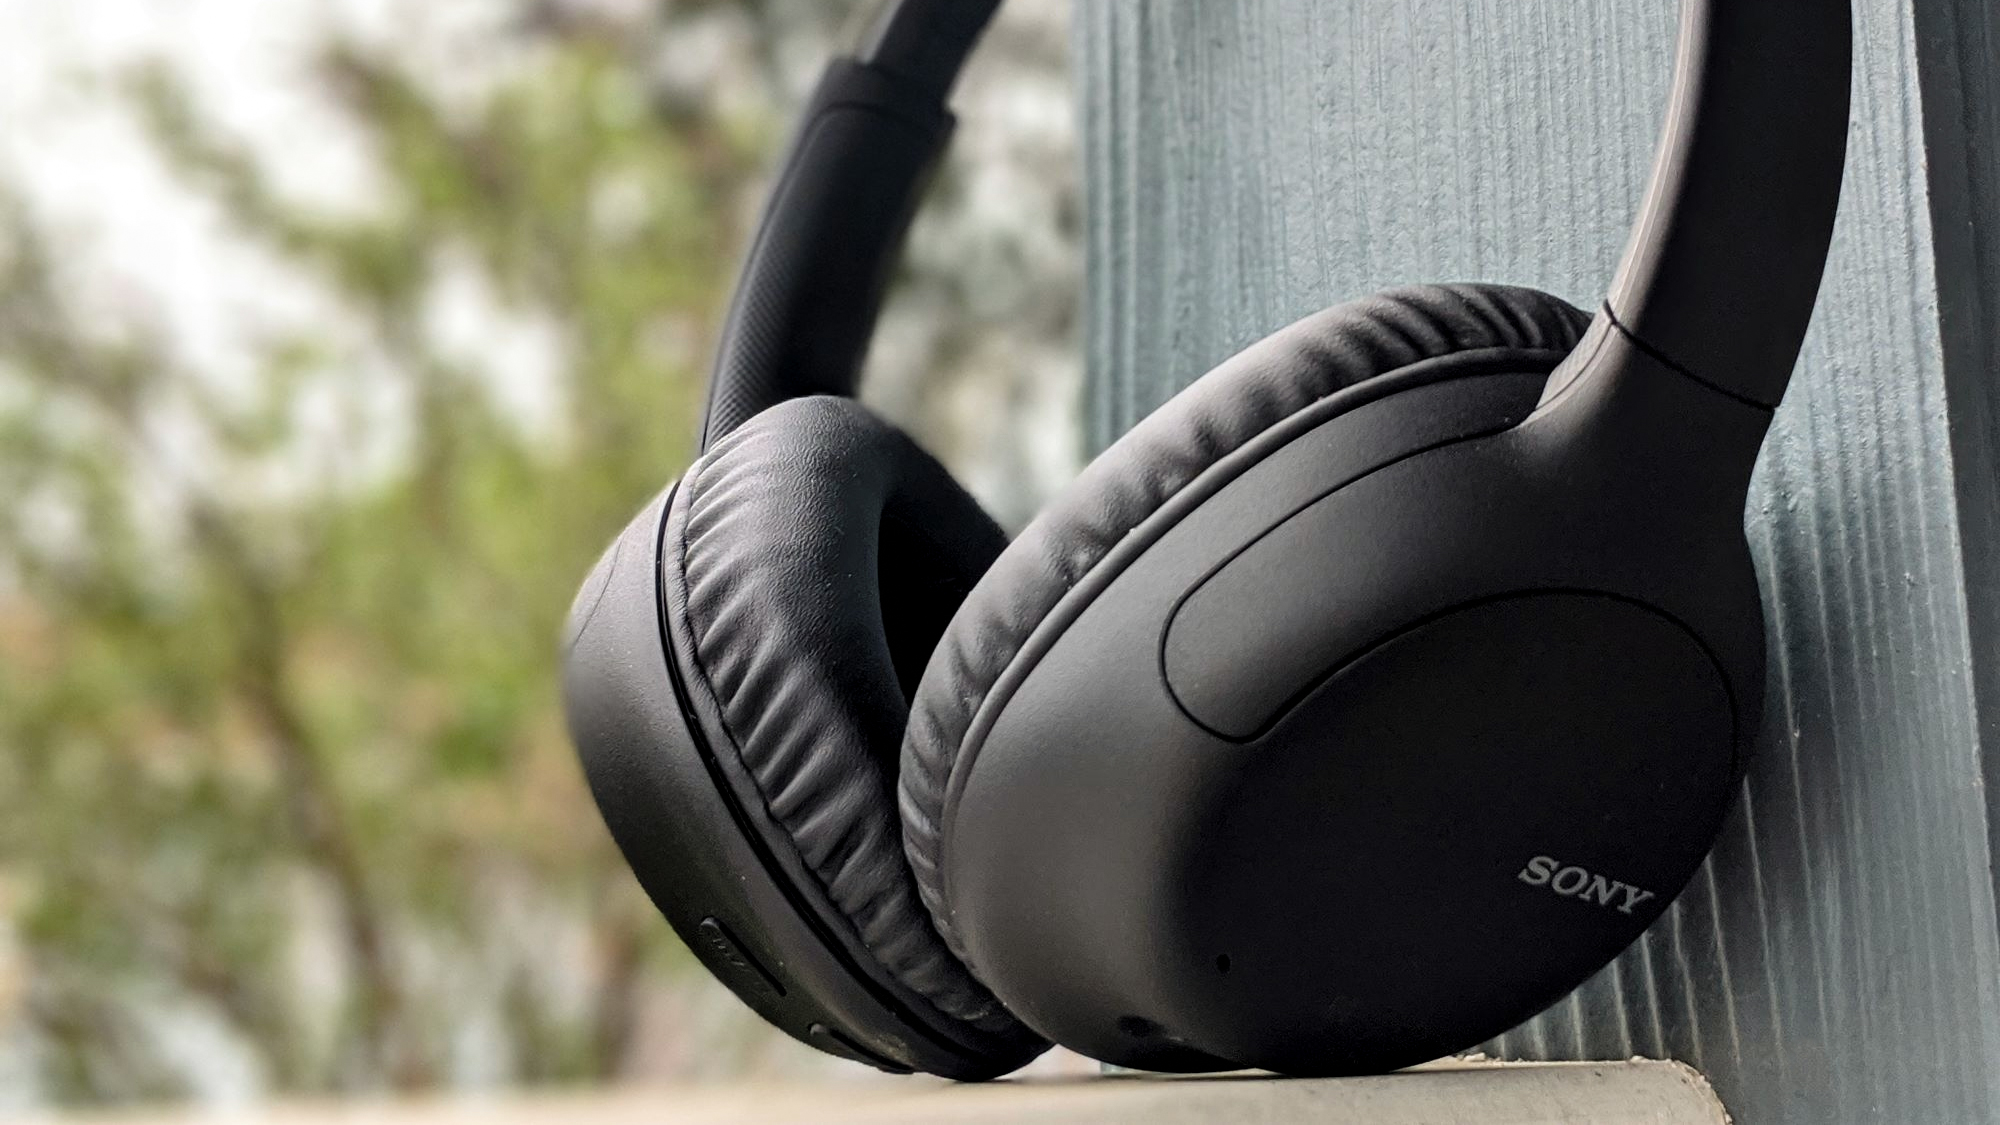 Sony WH-CH710N Headphones Review - Reviewed